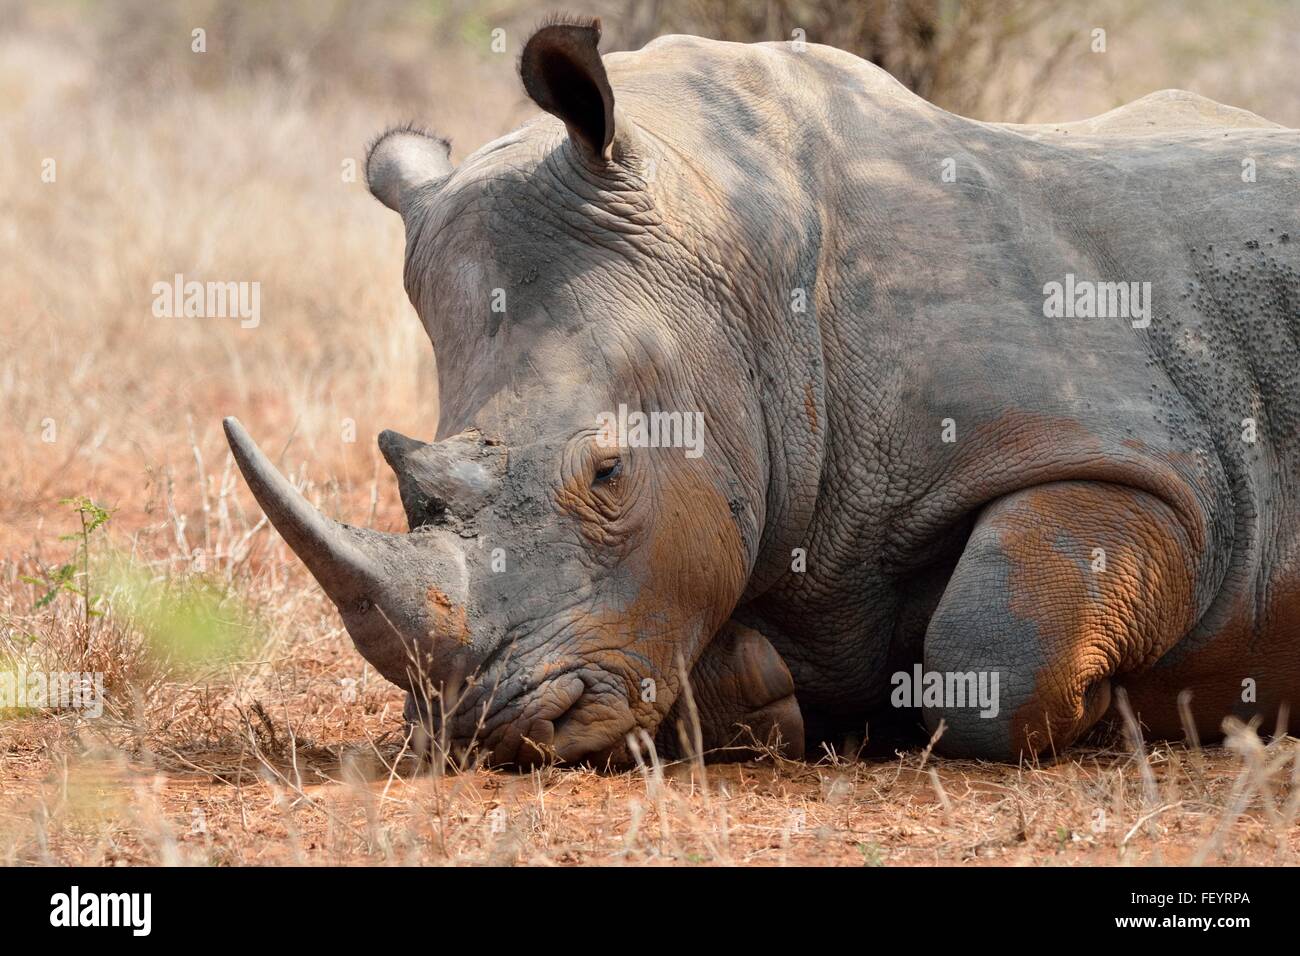 White rhinoceros or Square-lipped rhinoceros (Ceratotherium simum), lying down, asleep, covered in flies, Kruger NP,South Africa Stock Photo